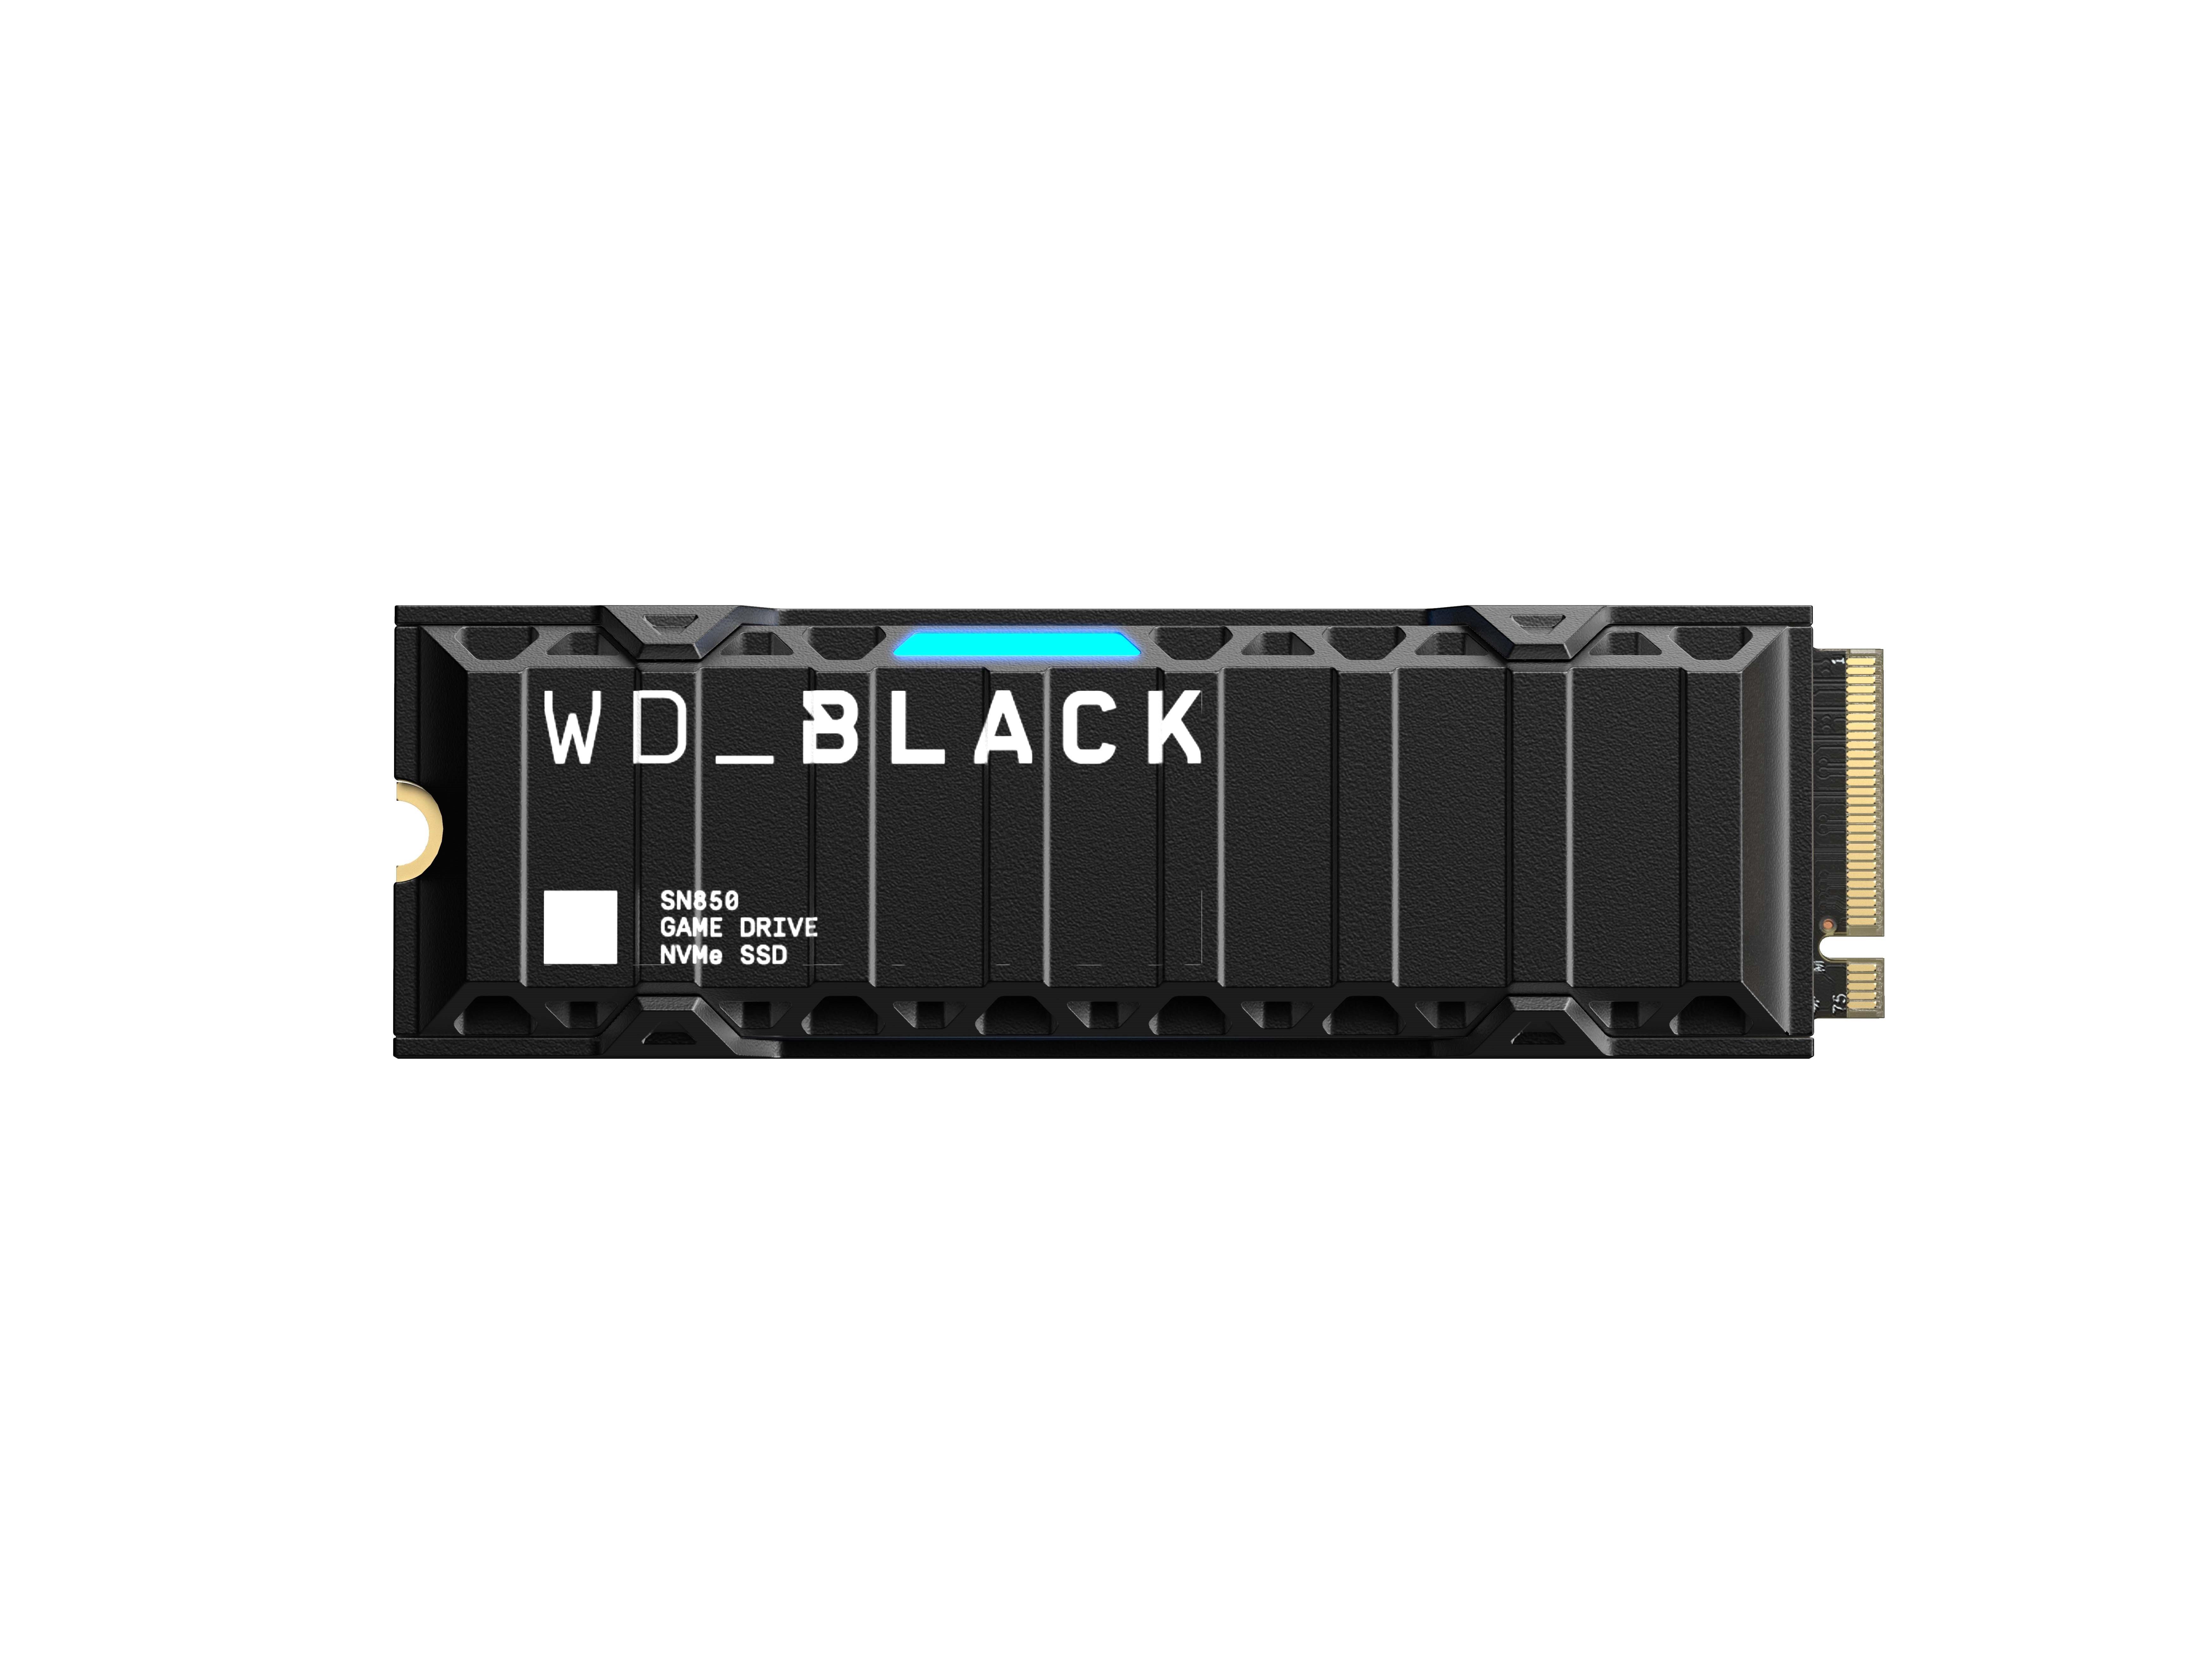  WD_BLACK 1TB SN850P NVMe M.2 SSD Officially Licensed